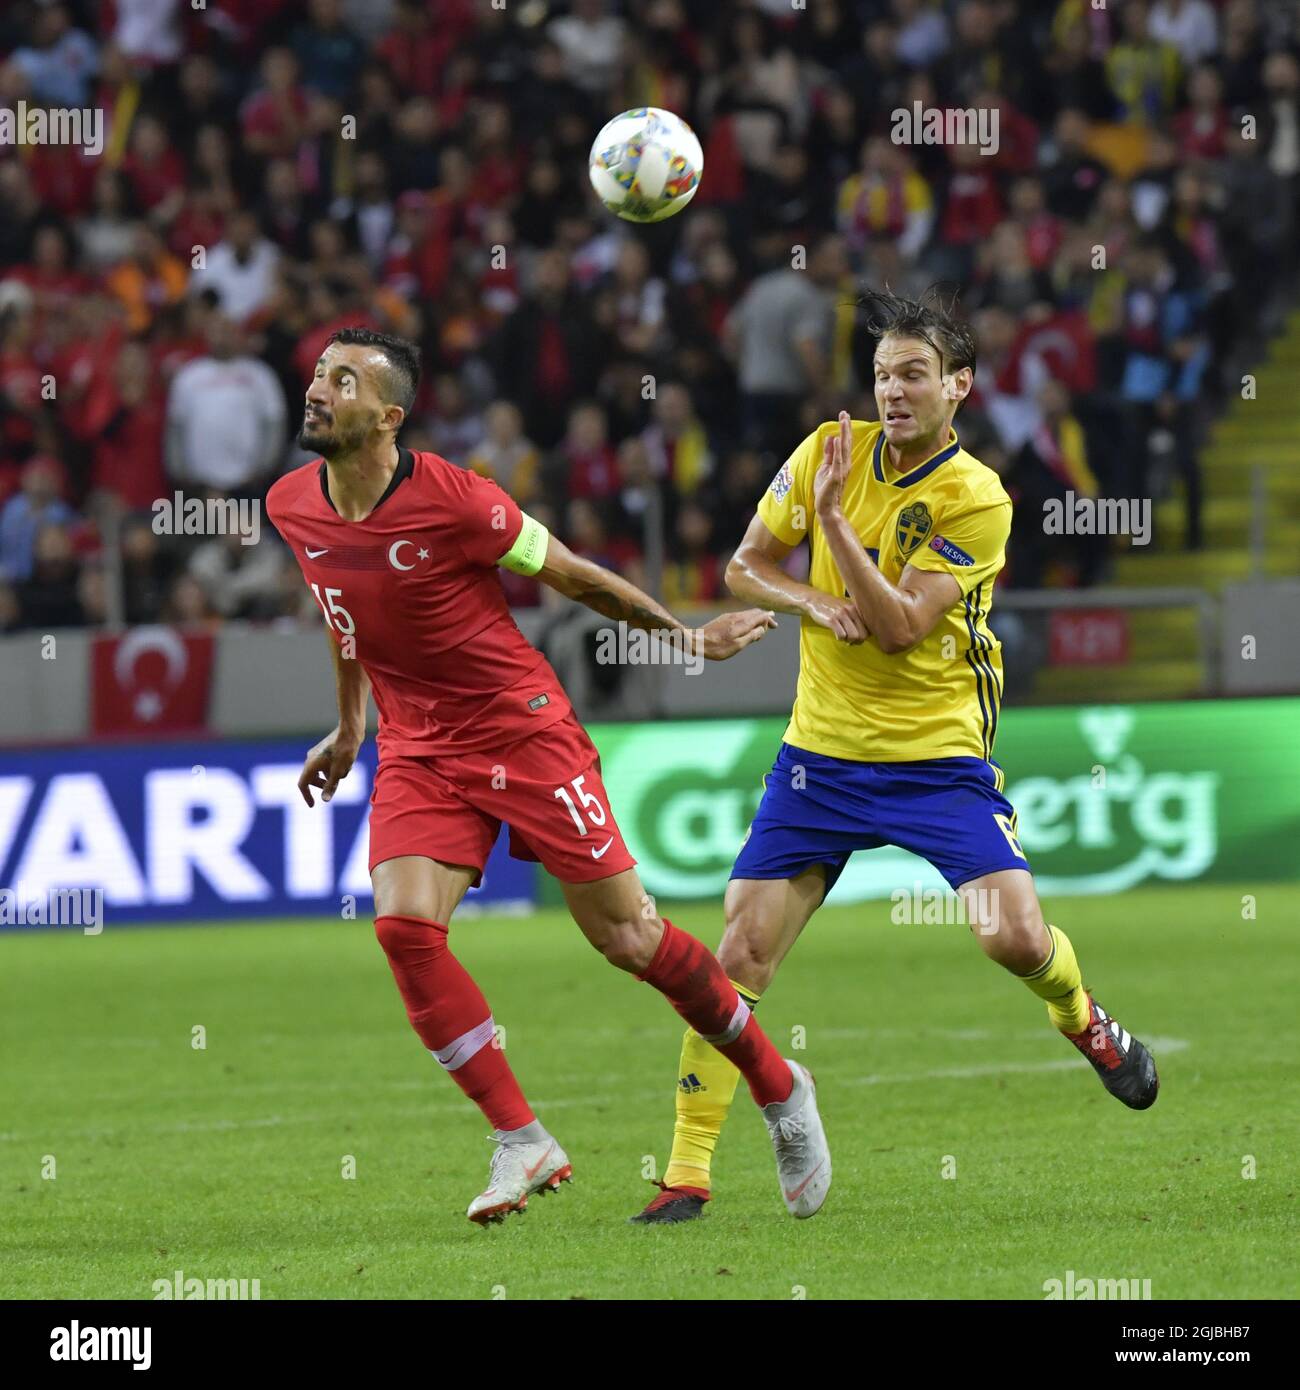 Turkey's Mehmet Topal (L) fights for the ball with Sweden's Albin Ekldal during the UEFA Nations League, league B, group 2, soccer match between Sweden and Turkey at Friends Arena in Solna, Stockholm, Sweden, on Sept. 10, 2018. Photo: Jonas Ekstromer / TT / code 10030  Stock Photo